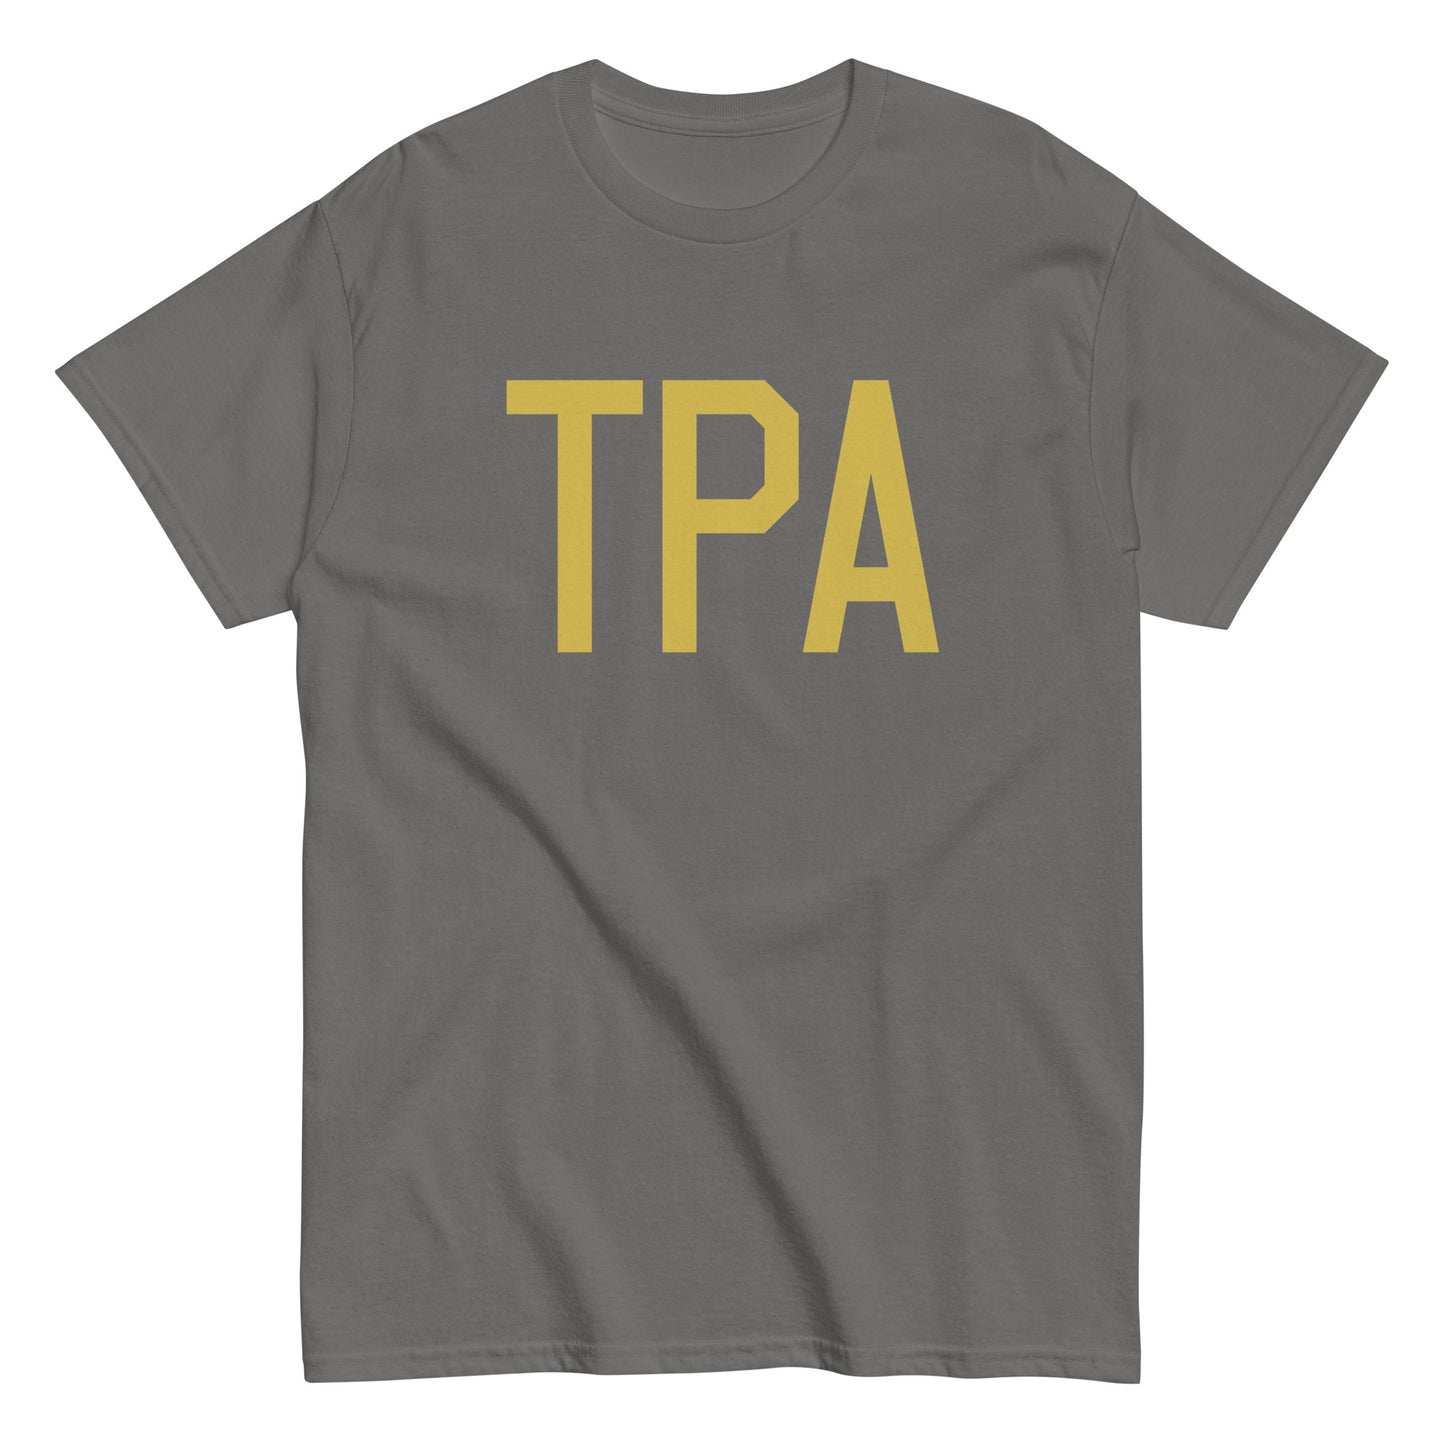 Aviation Enthusiast Men's Tee - Old Gold Graphic • TPA Tampa • YHM Designs - Image 01